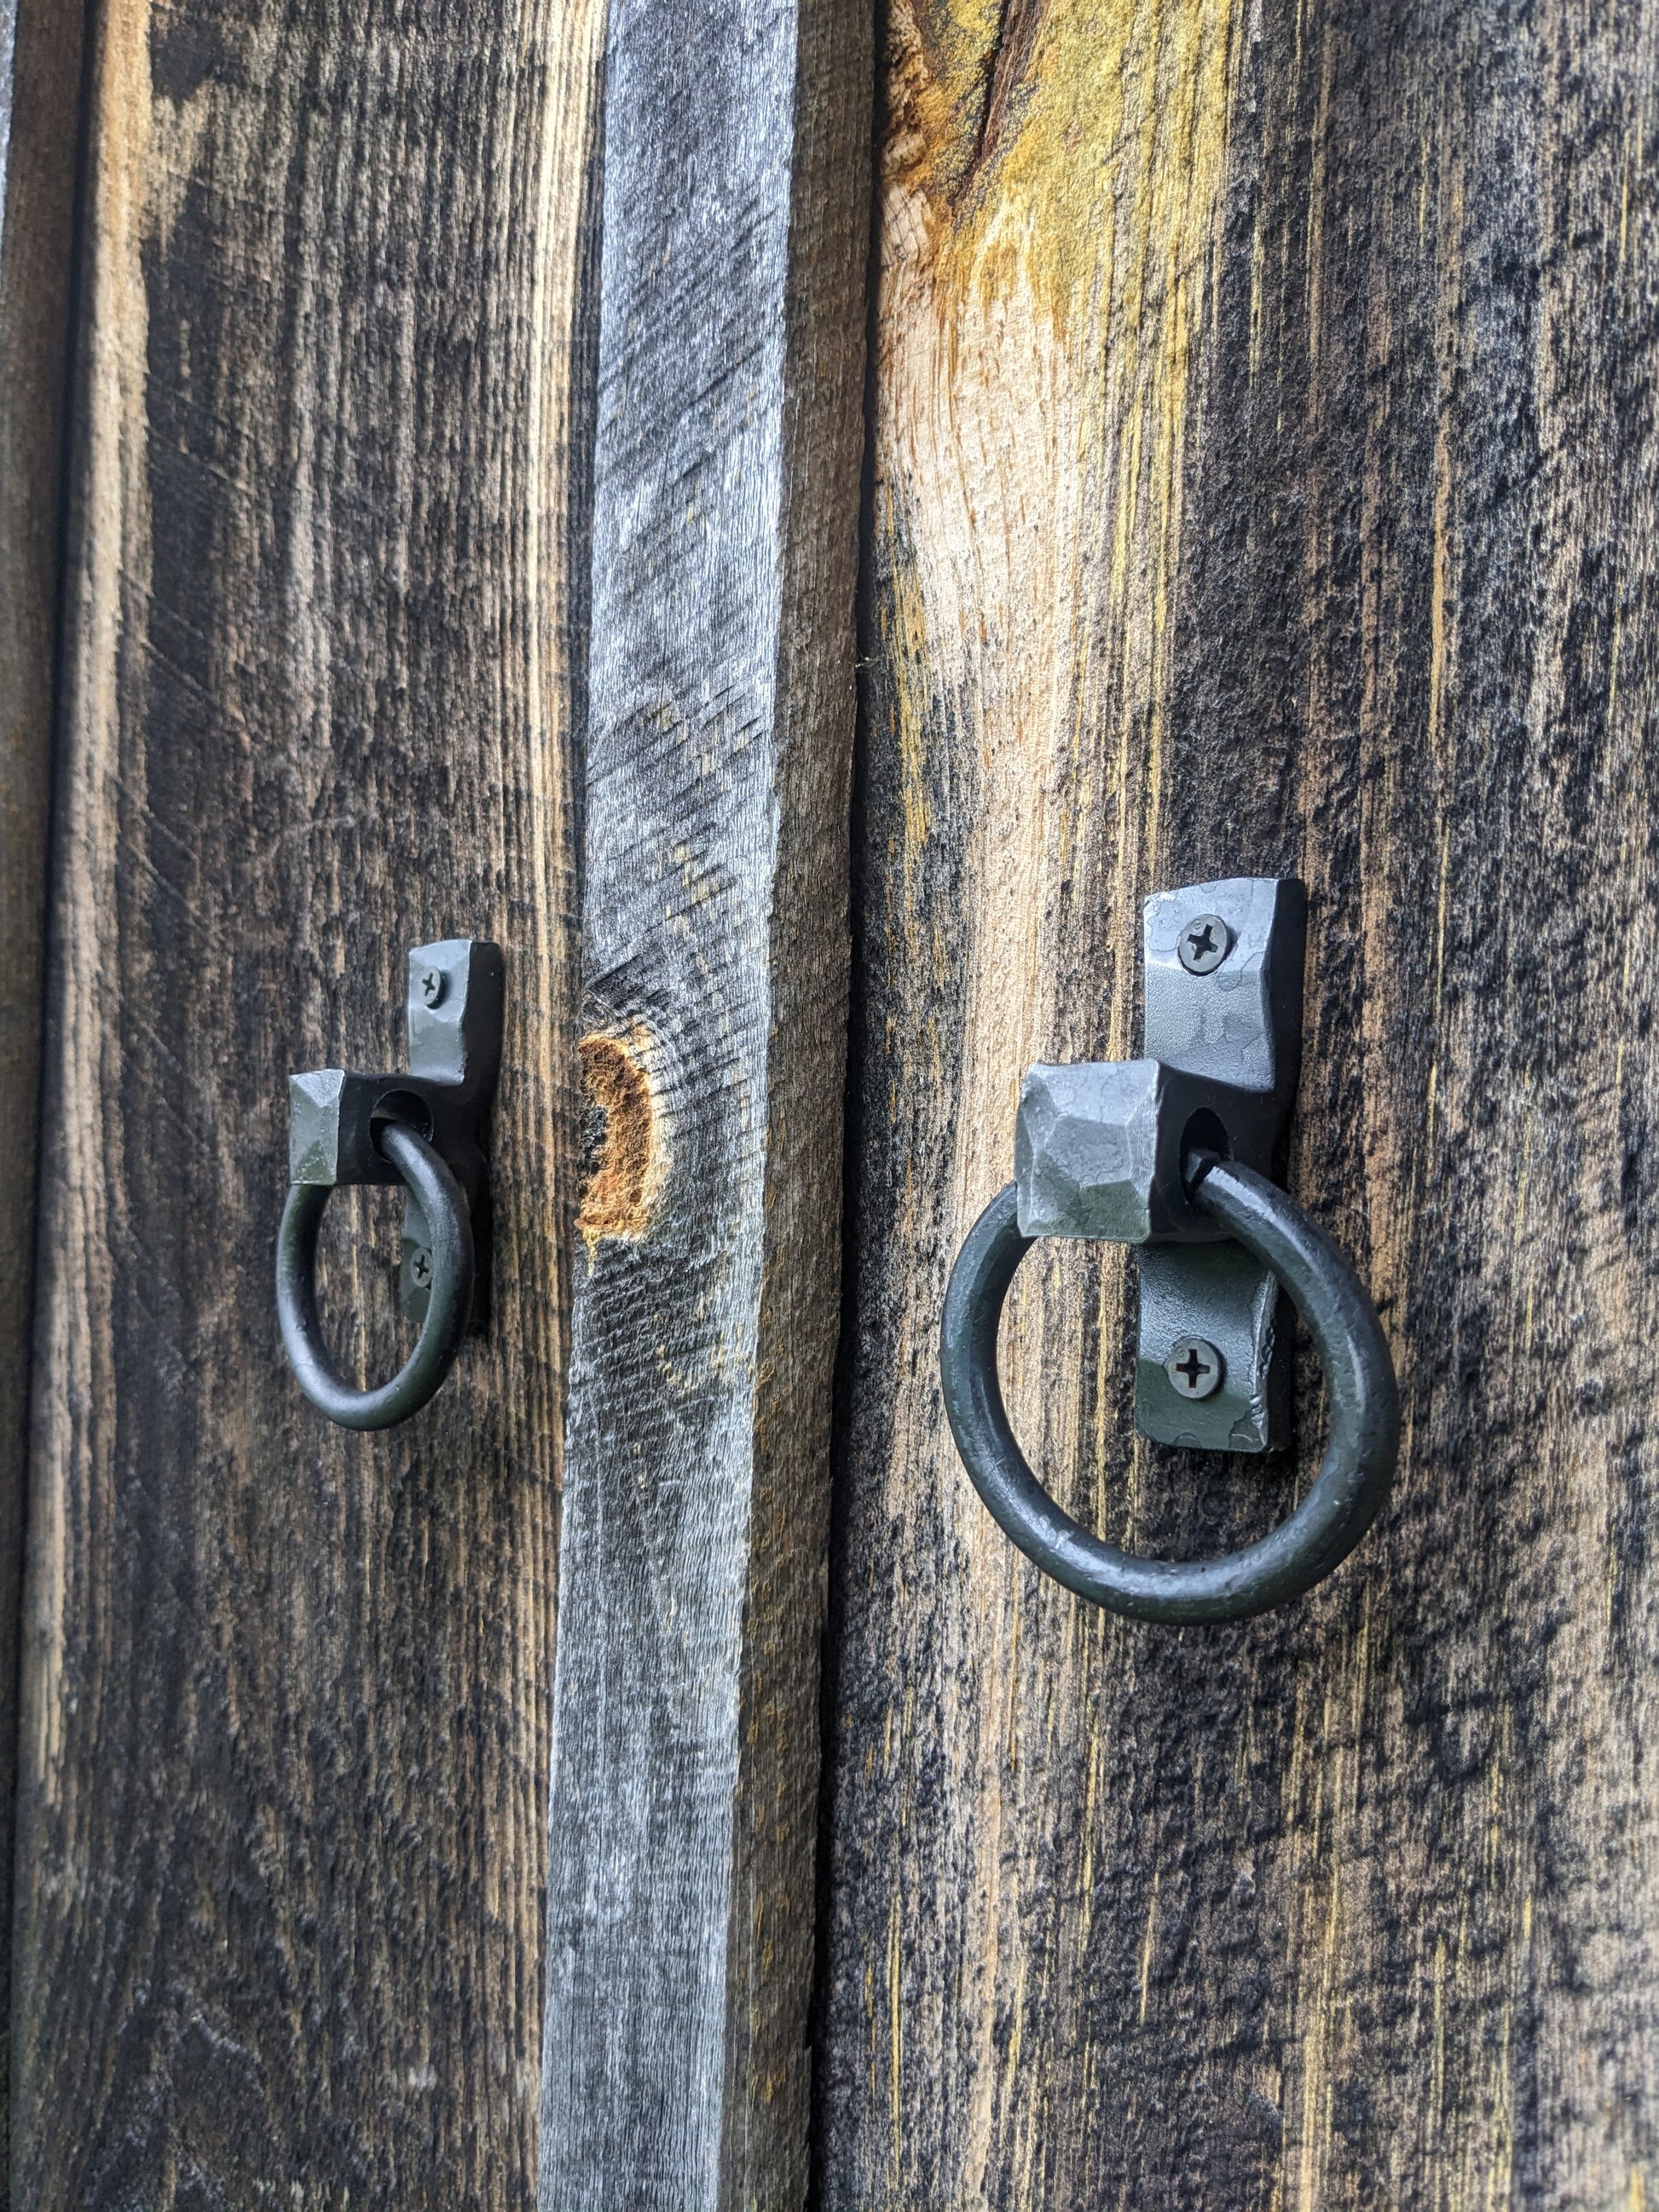 Two small hand forged blacksmith made ring handles mounted onto barn wood doors.